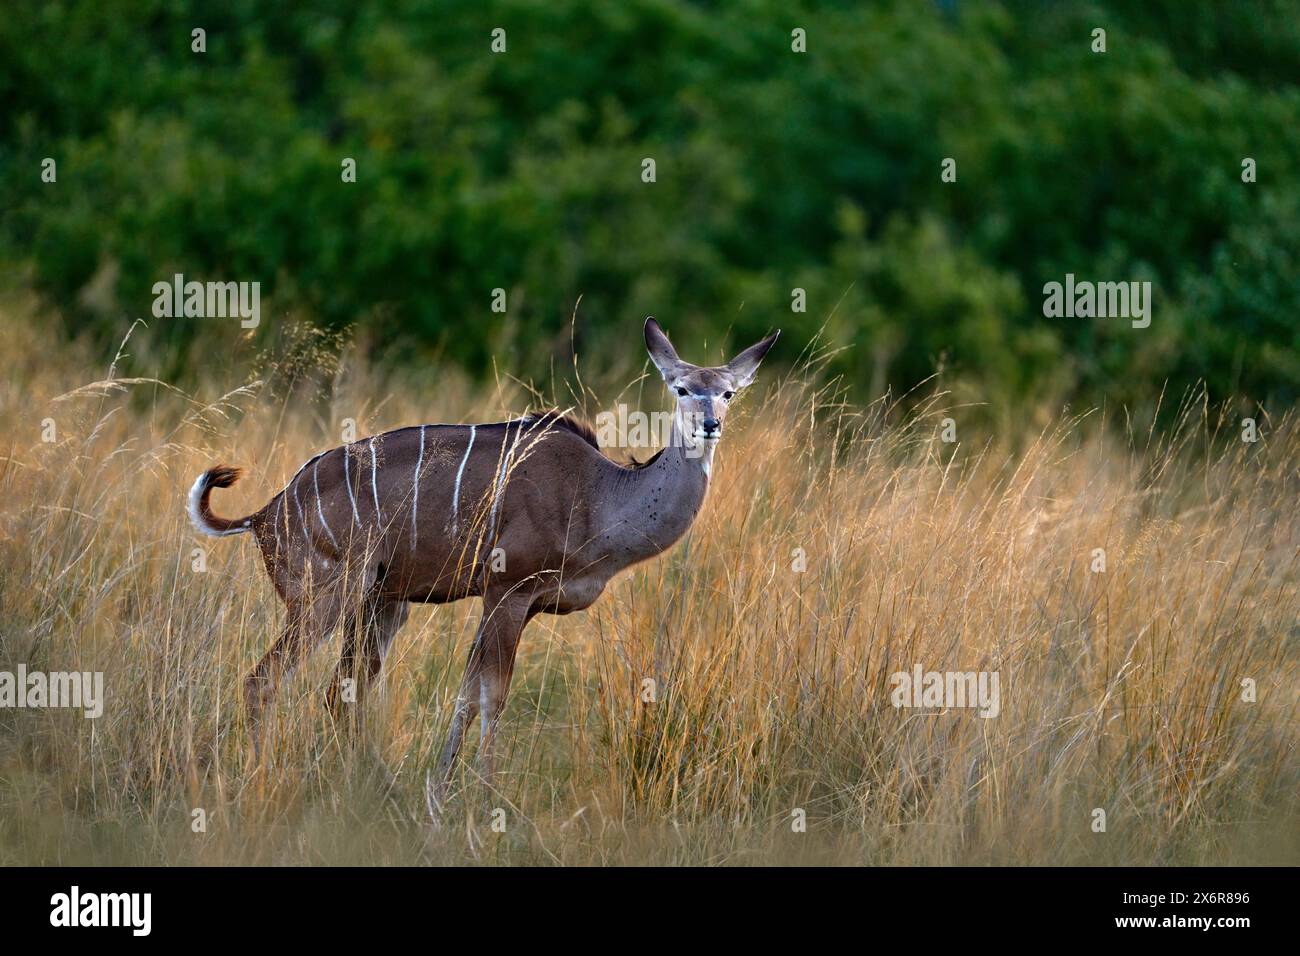 Greater kudu, Tragelaphus strepsiceros, handsome antelope with spiral horns. Kudu in Africa. Wildlife scene from nature. Animal in the green meadow ha Stock Photo